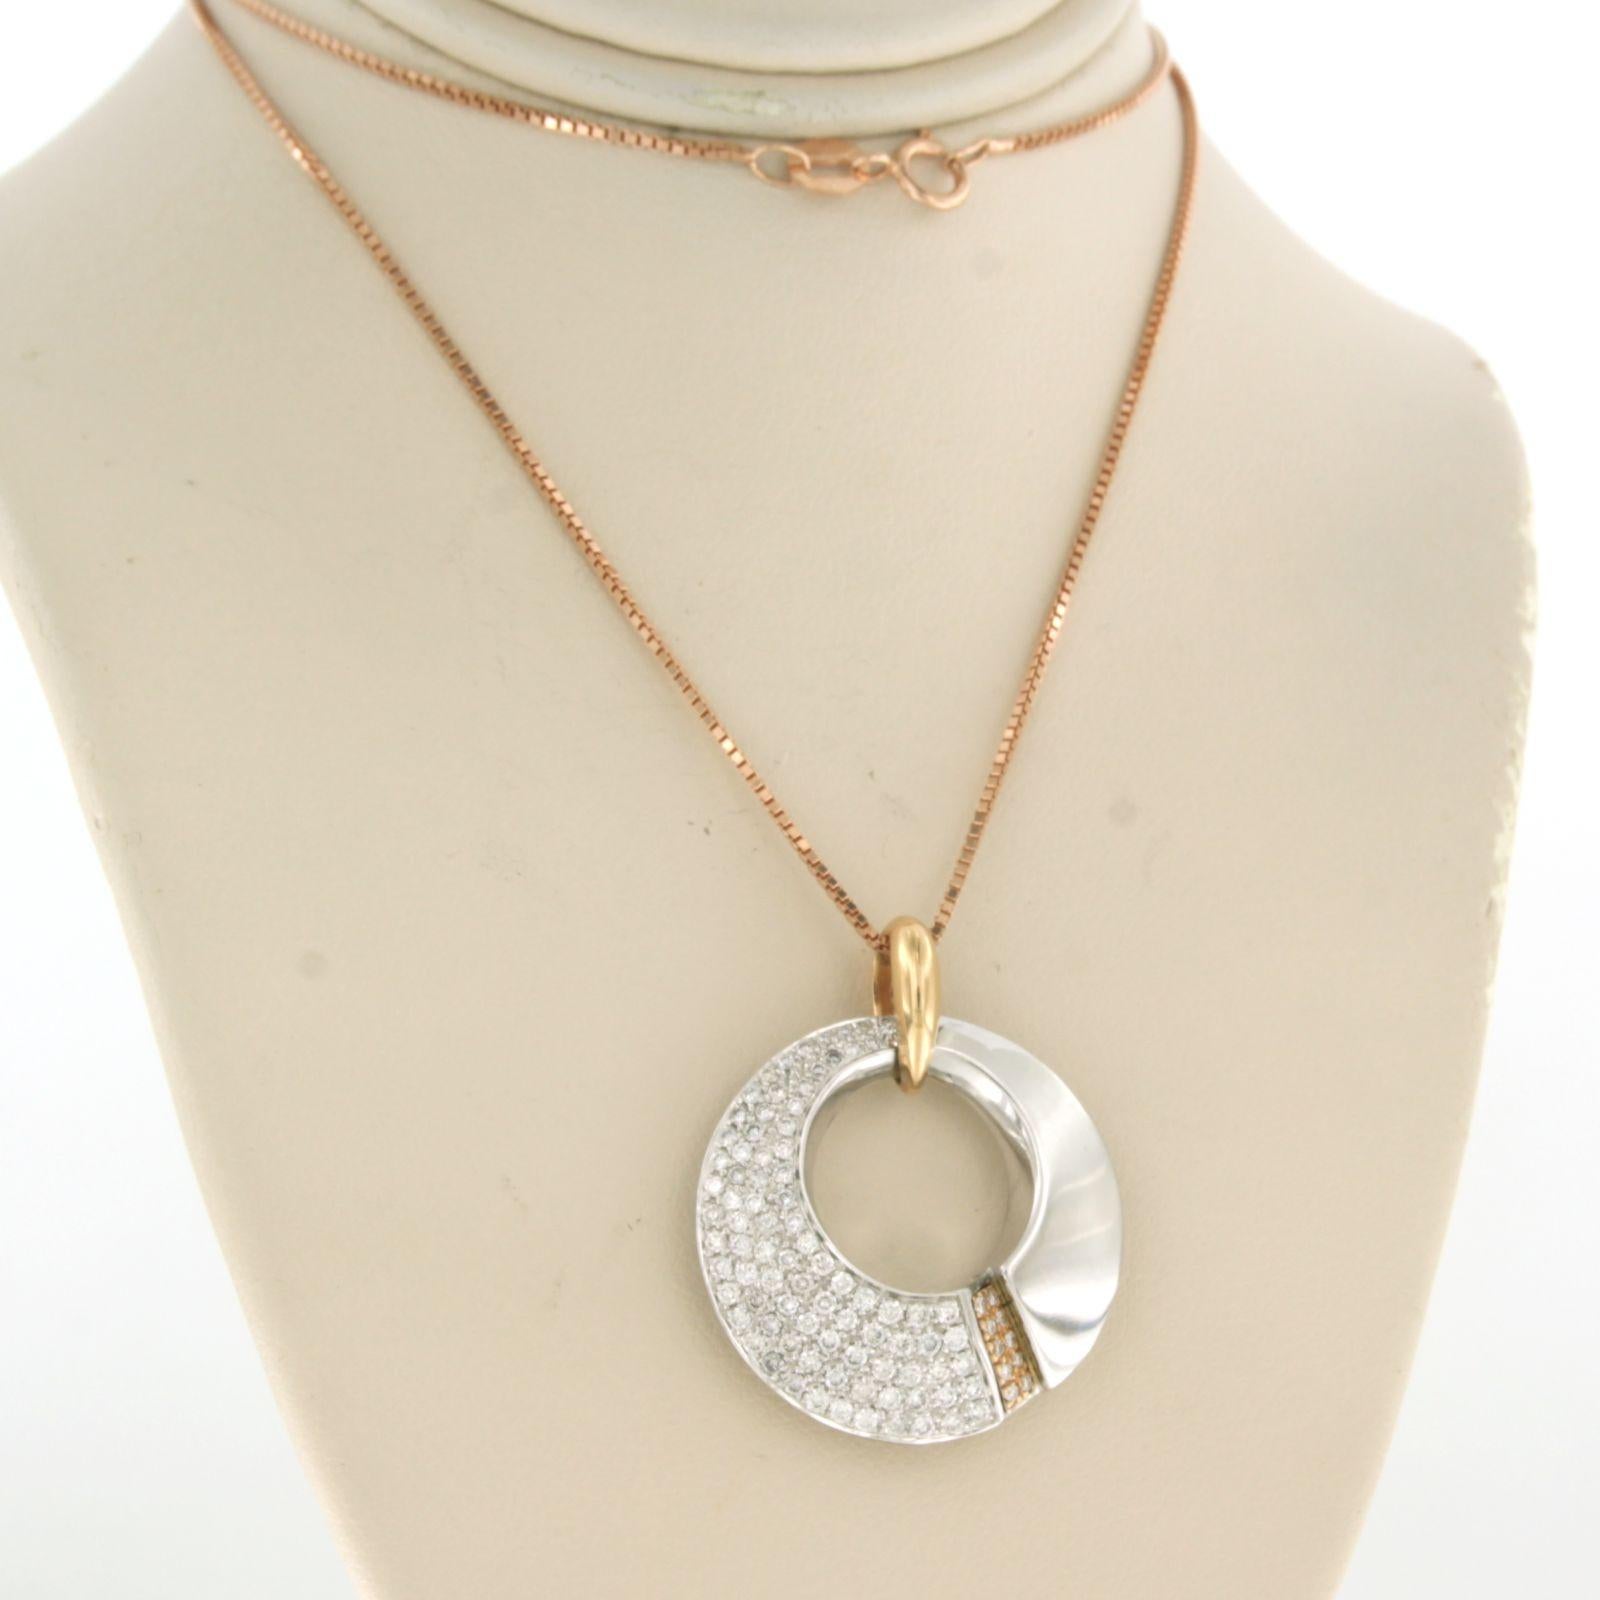 18k rose gold necklace and a pendant from the CHIMENTO brand set with brilliant cut diamonds up to. 0.65ct – F/G –VS/ SI -45 cm long

detailed description:

the necklace is 45 cm long and 0.7 mm wide

the size of the pendant is 2.9 cm long by 2.5 cm